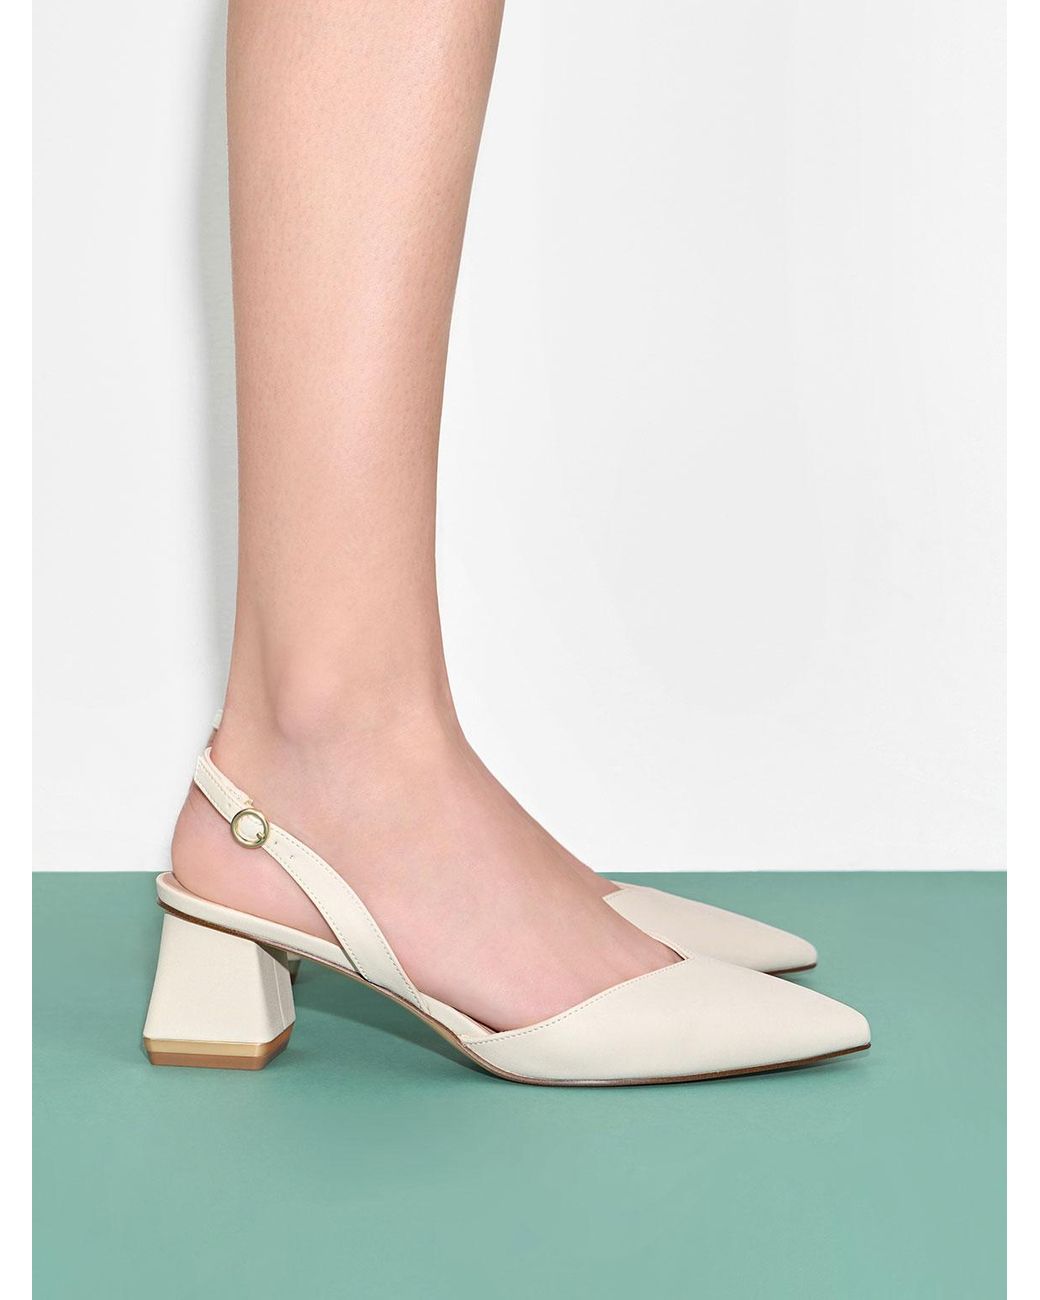 Charles & Keith slingback black toe heeled shoes in white | ASOS